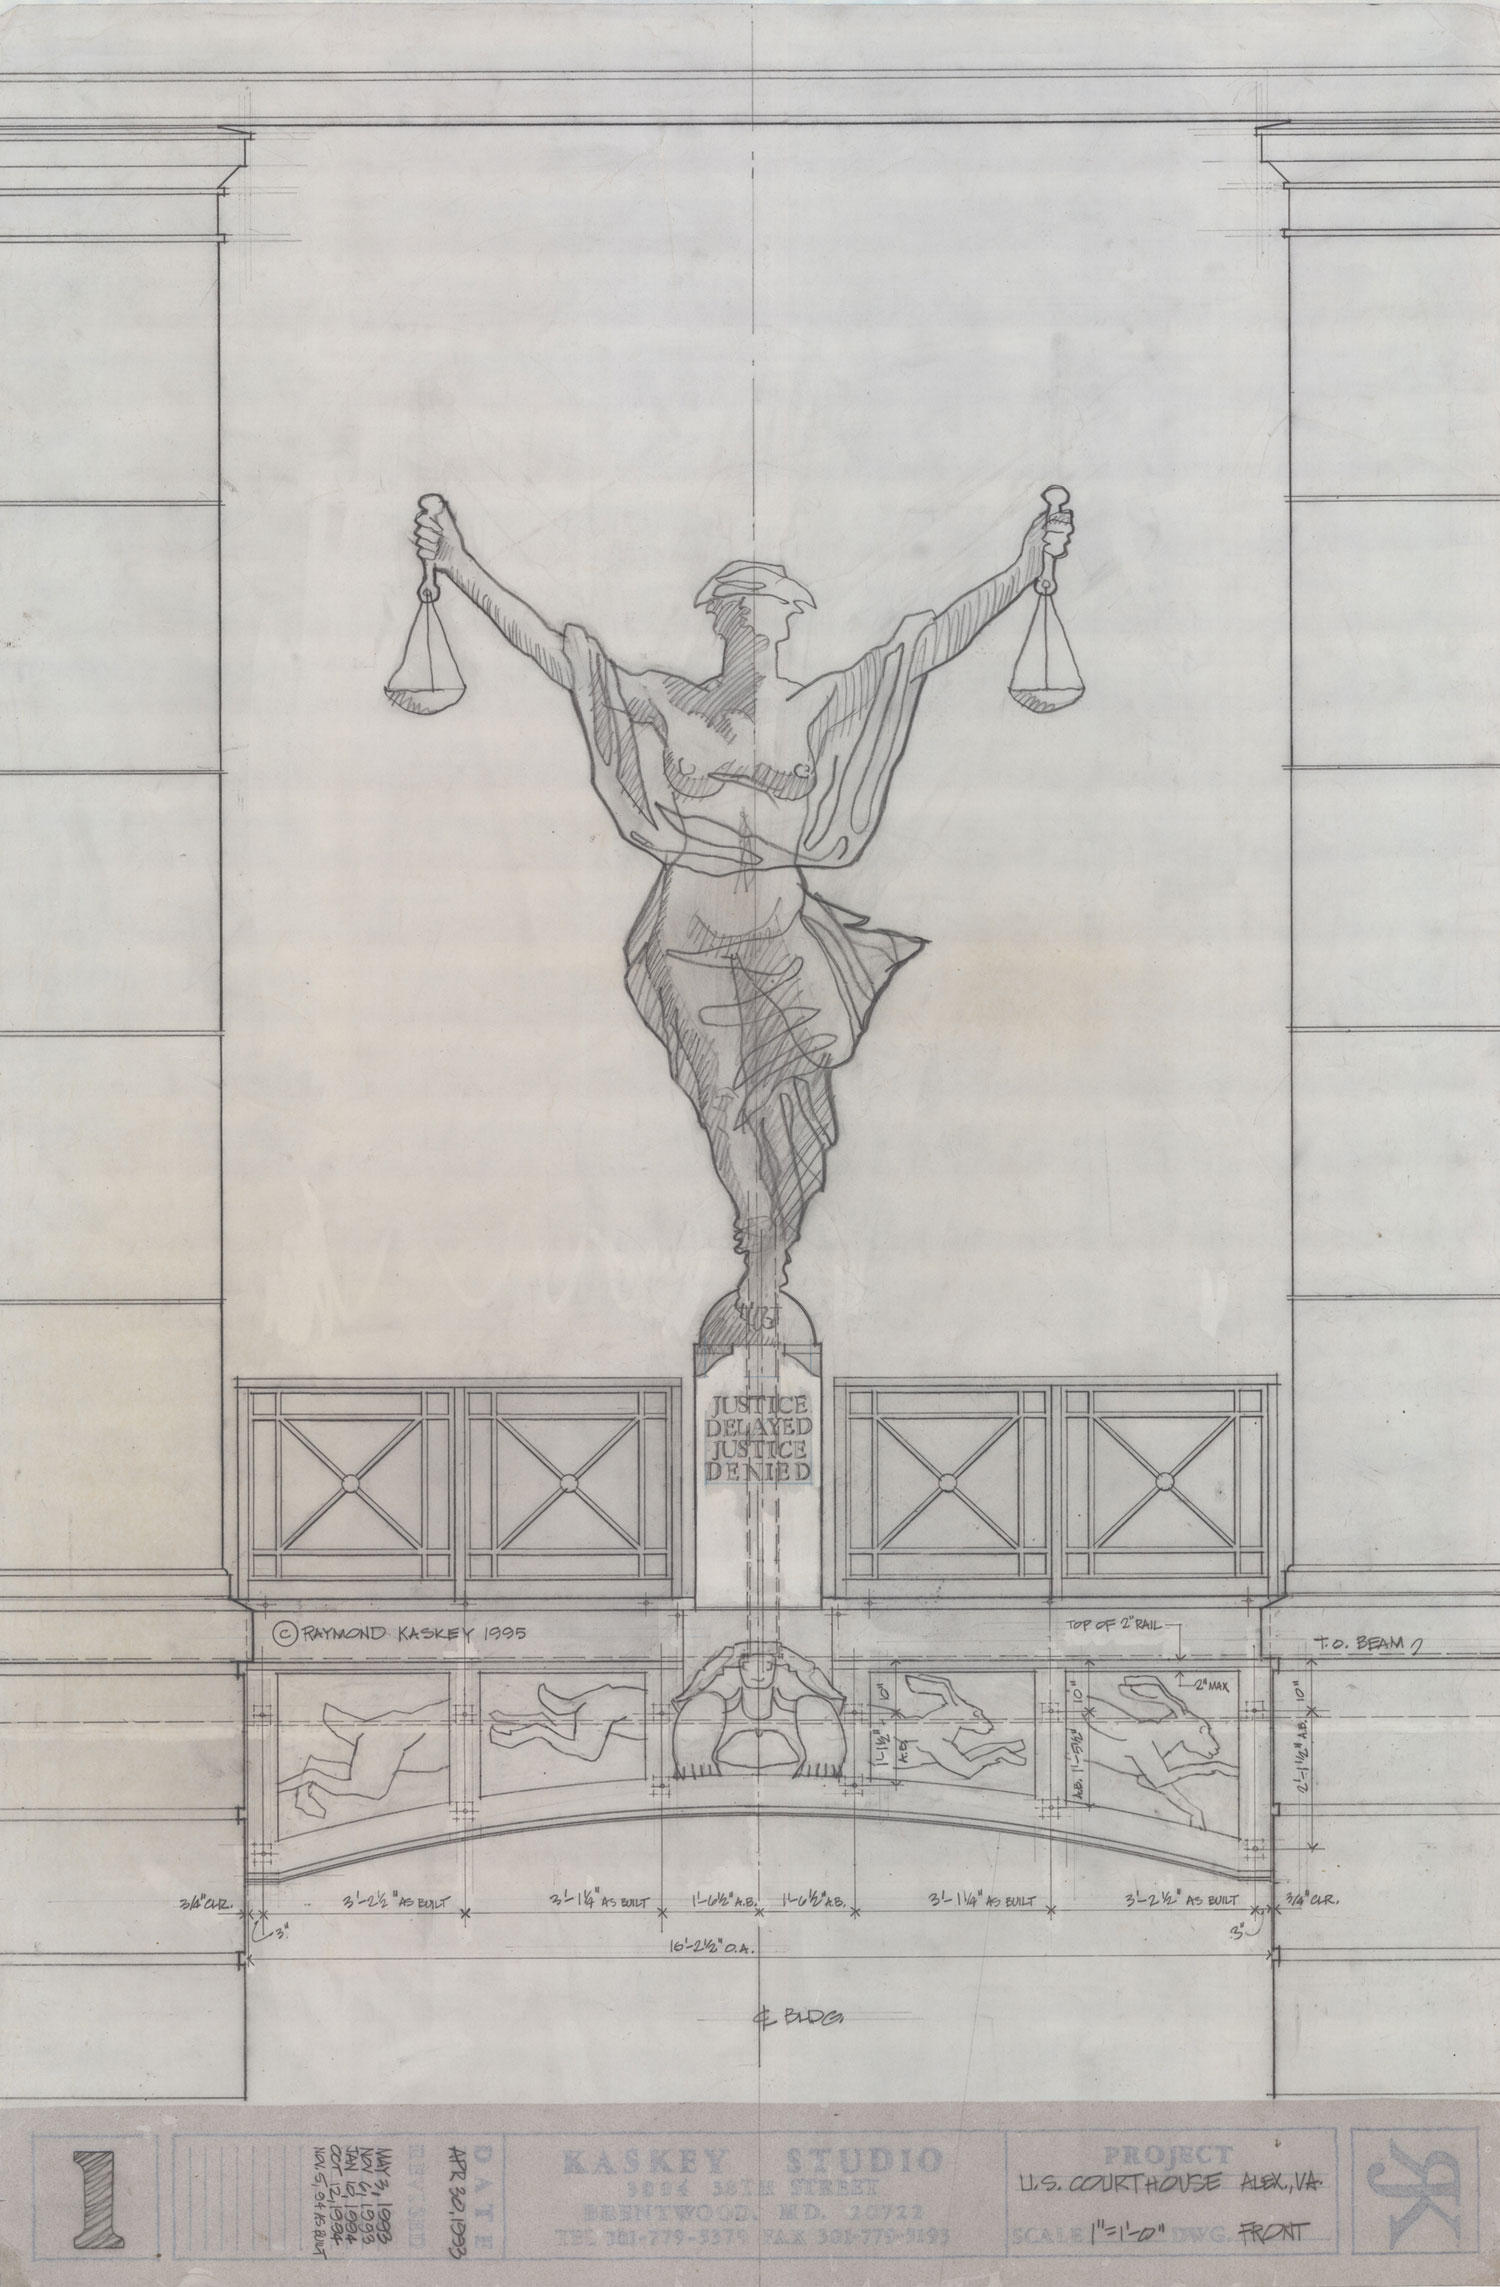 Alexandria Courthouse, Justice Delayed, Justice Denied, preparatory drawing. Kaskey Studio.